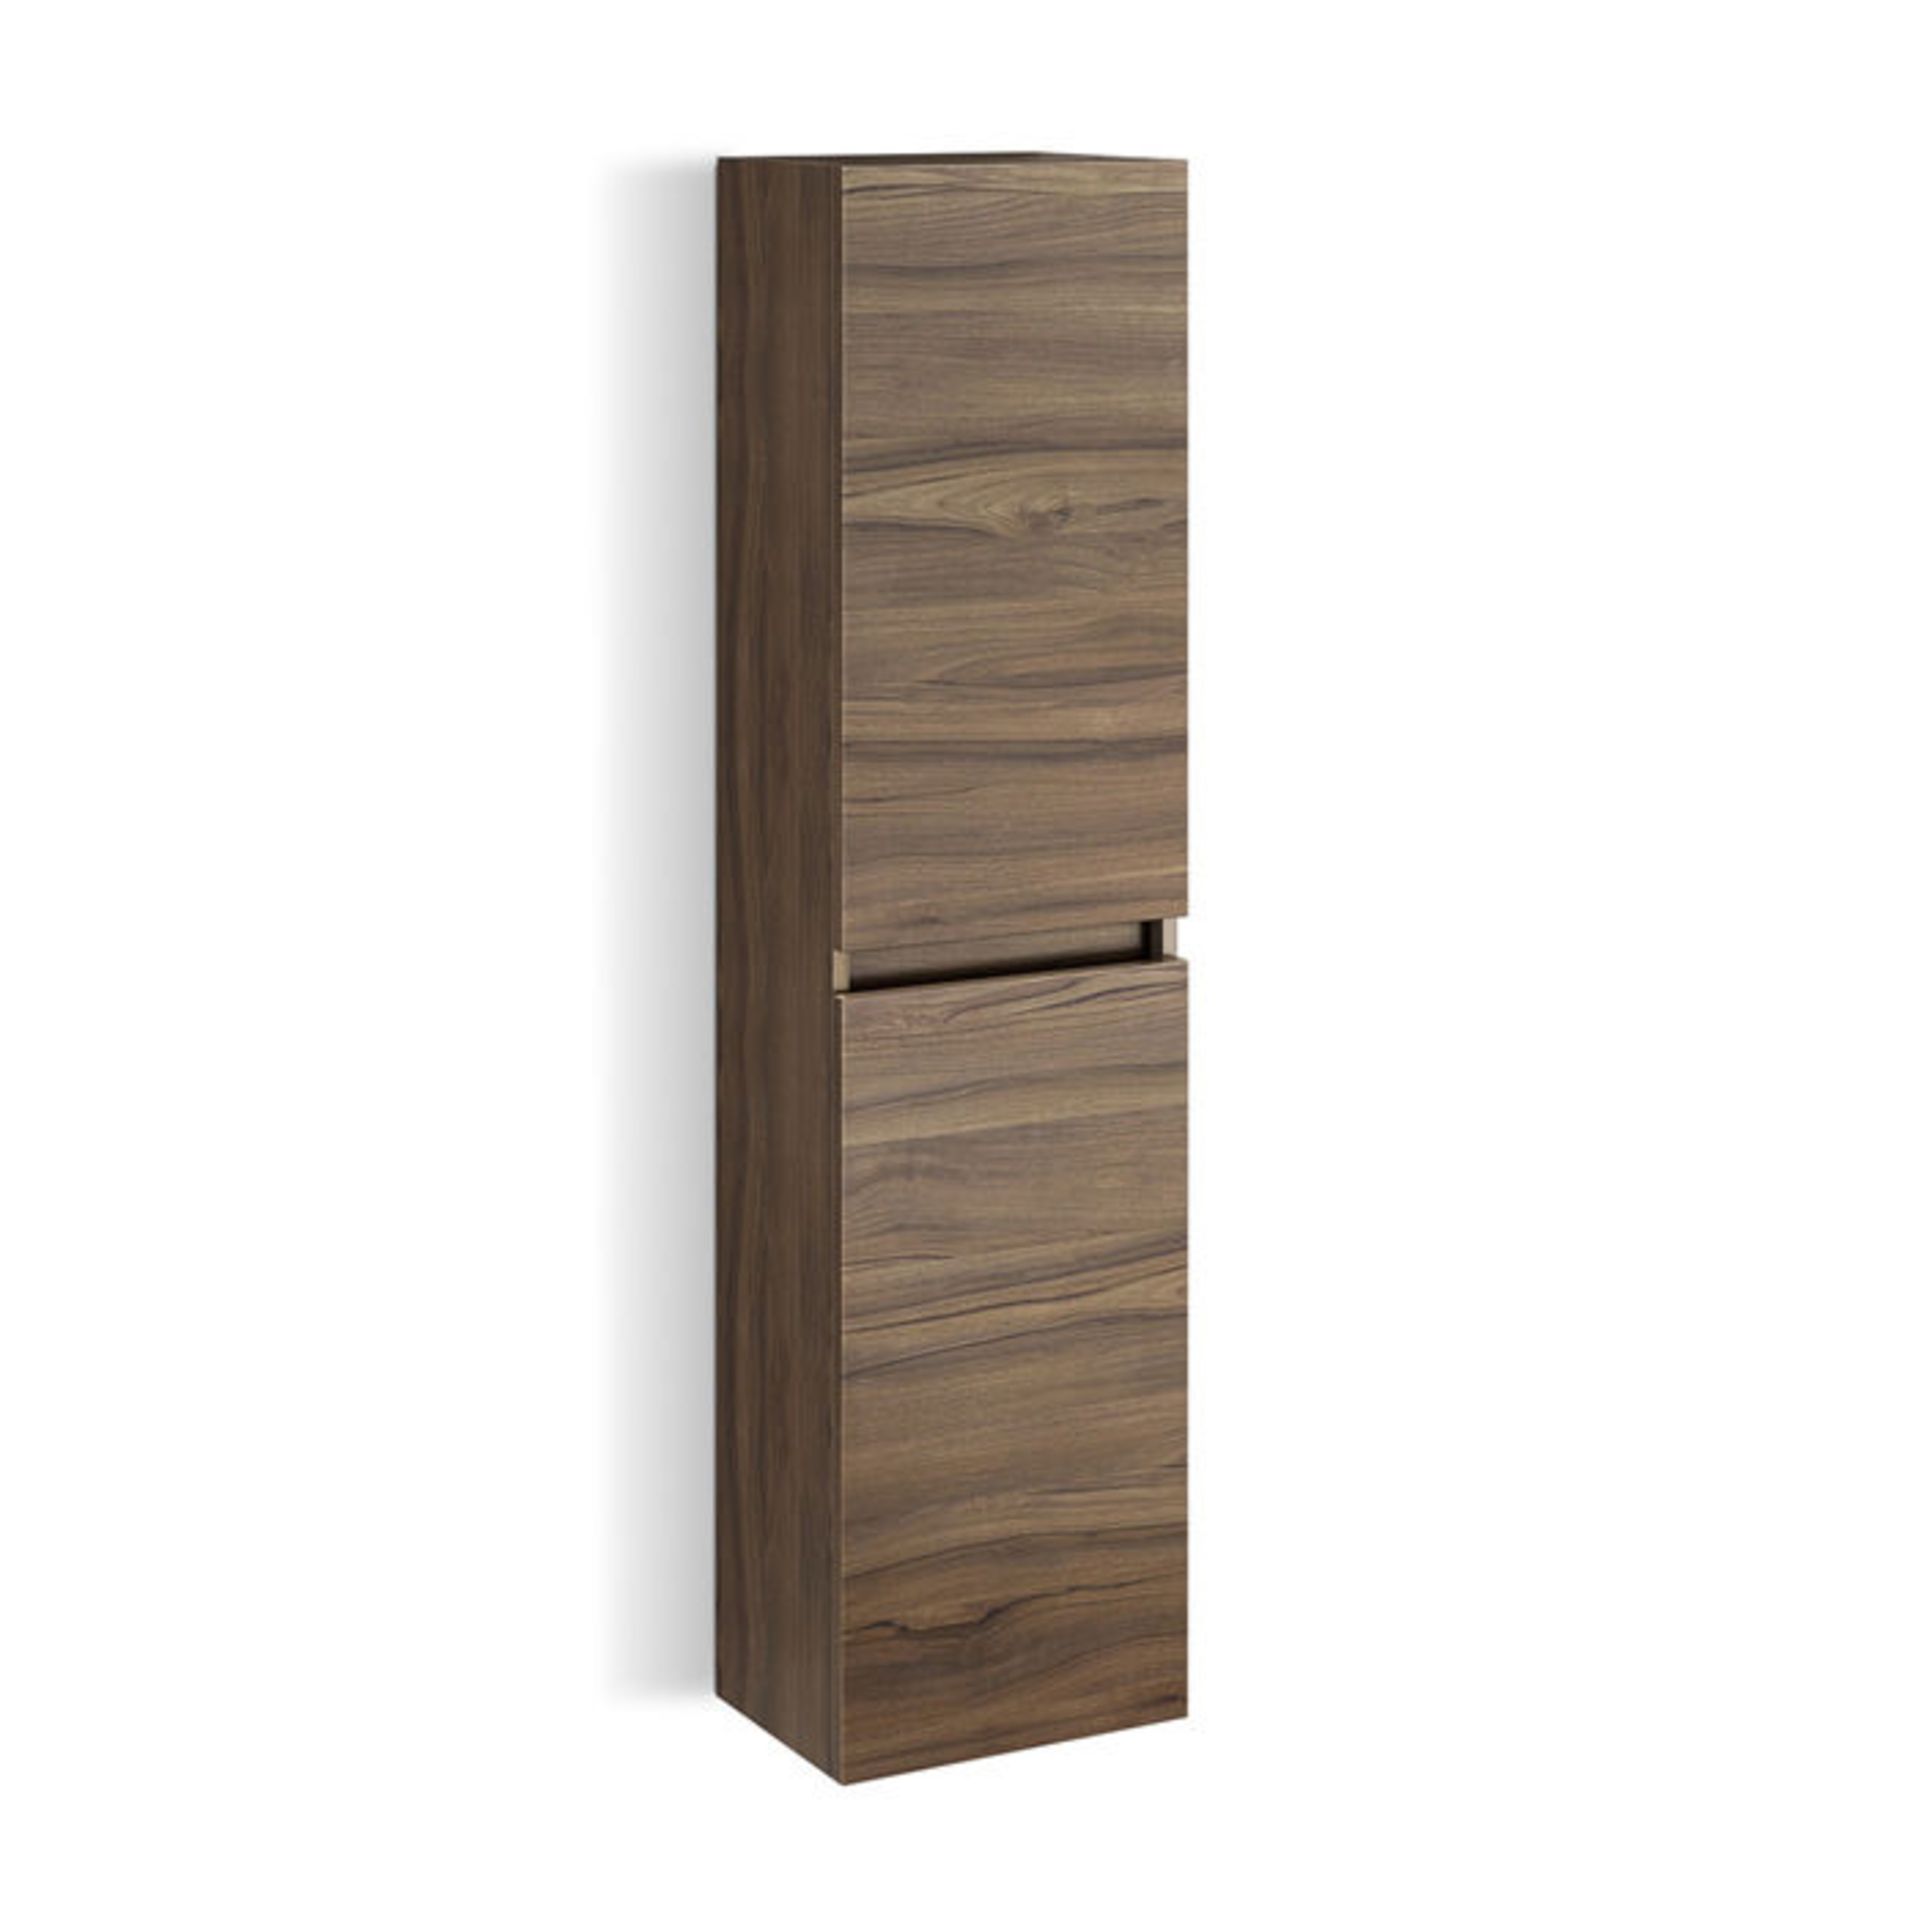 (YC24) Walnut Effect Wall Hung Tall Storage Cabinet. Great practical storage solution with - Image 2 of 3